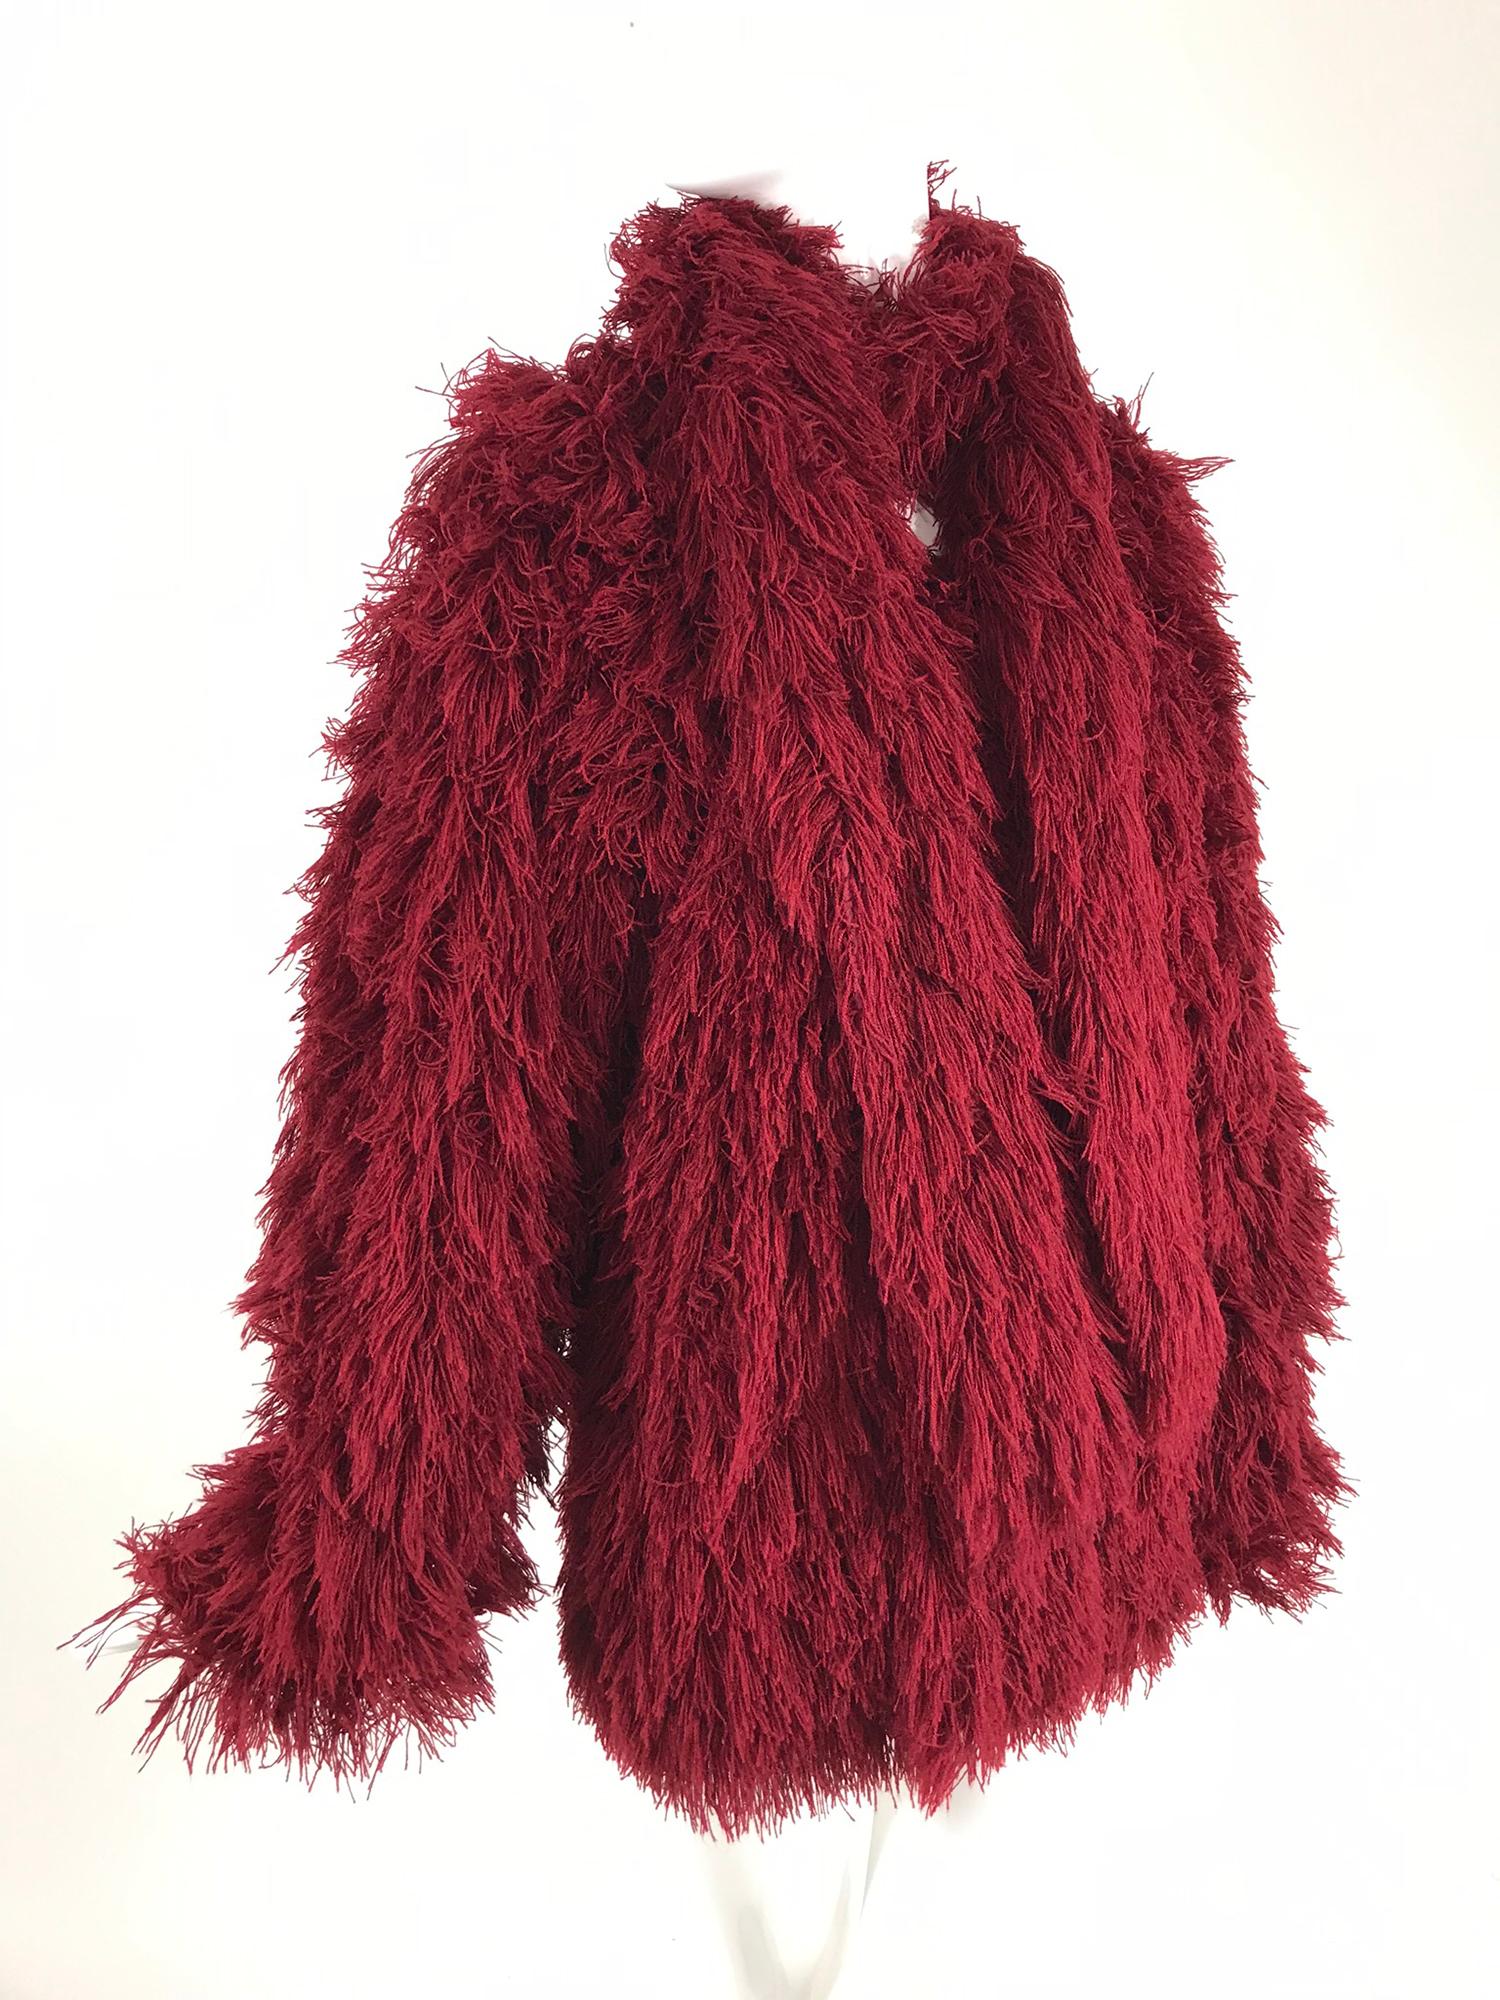 Arissa France burgundy faux fur jacket and scarf from the 1980s. This faux fur jacket has the look of Mongolian lamb. Long sleeve jacket with a V neckline, angled front pockets and matching long scarf. The fabric is similar to wool string, it looks